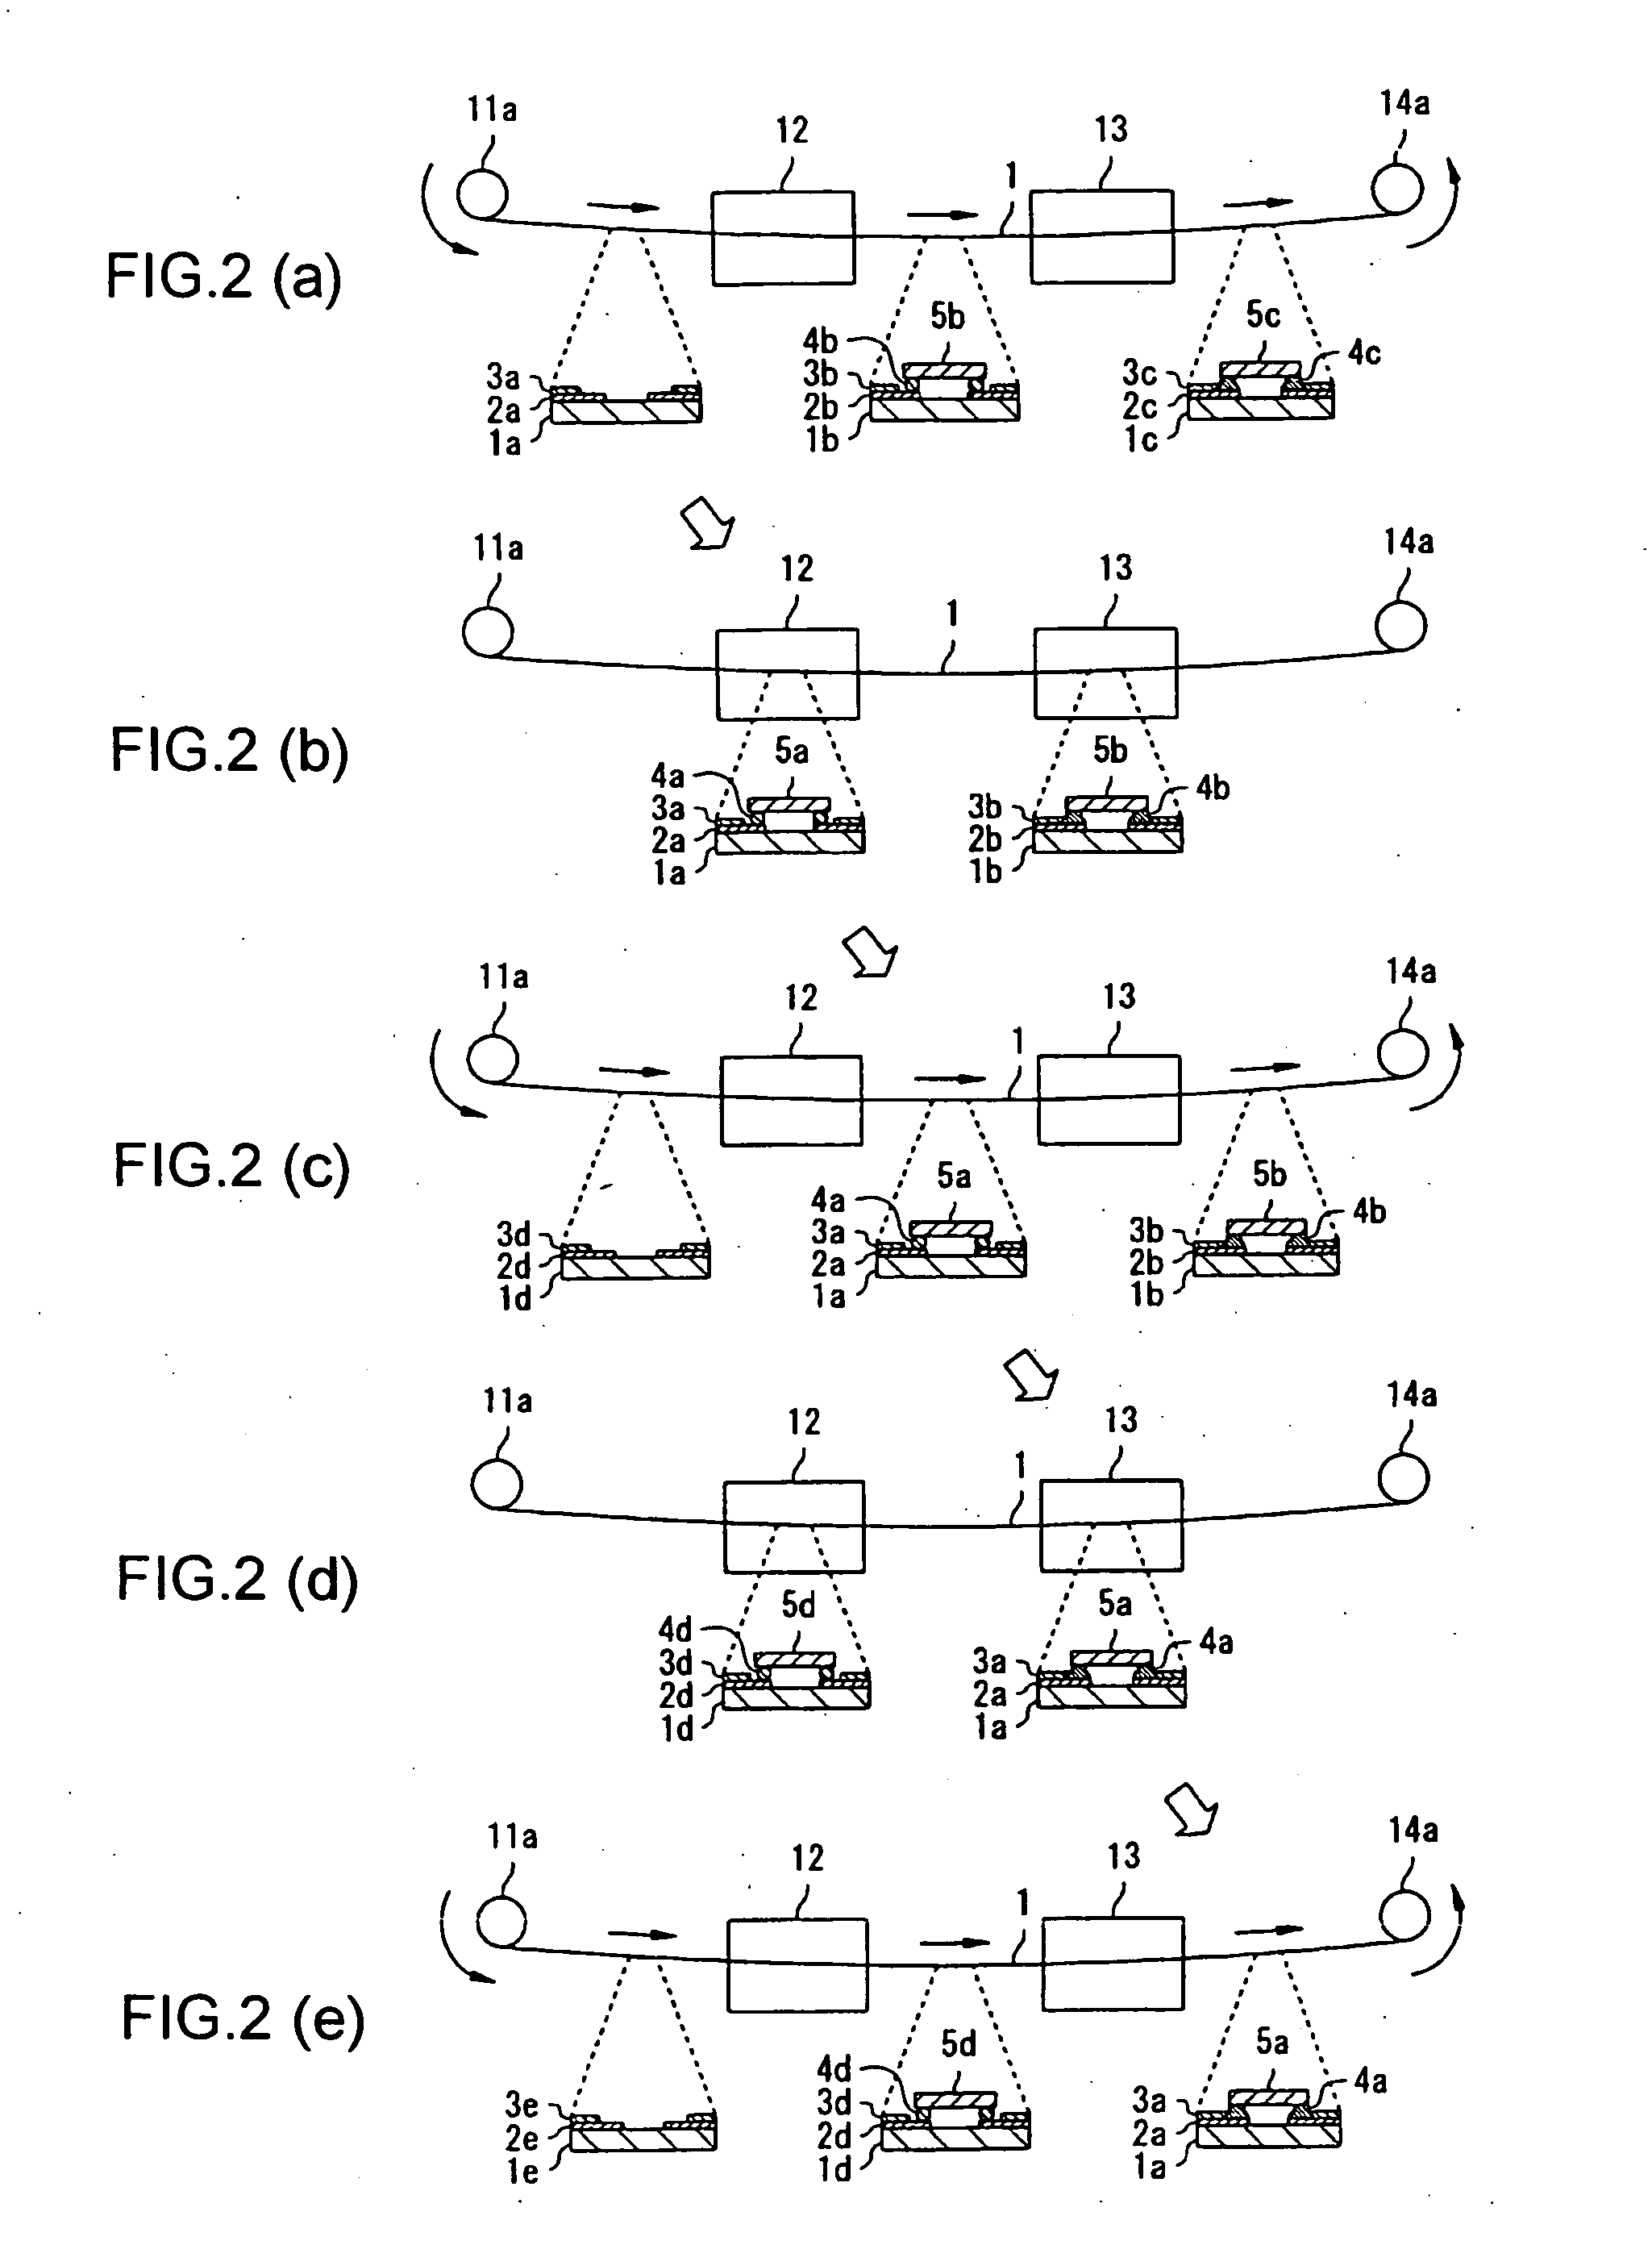 Apparatus for manufacturing an electronic device, method of manufacturing an electronic device, and program for manufacturing an electronic device